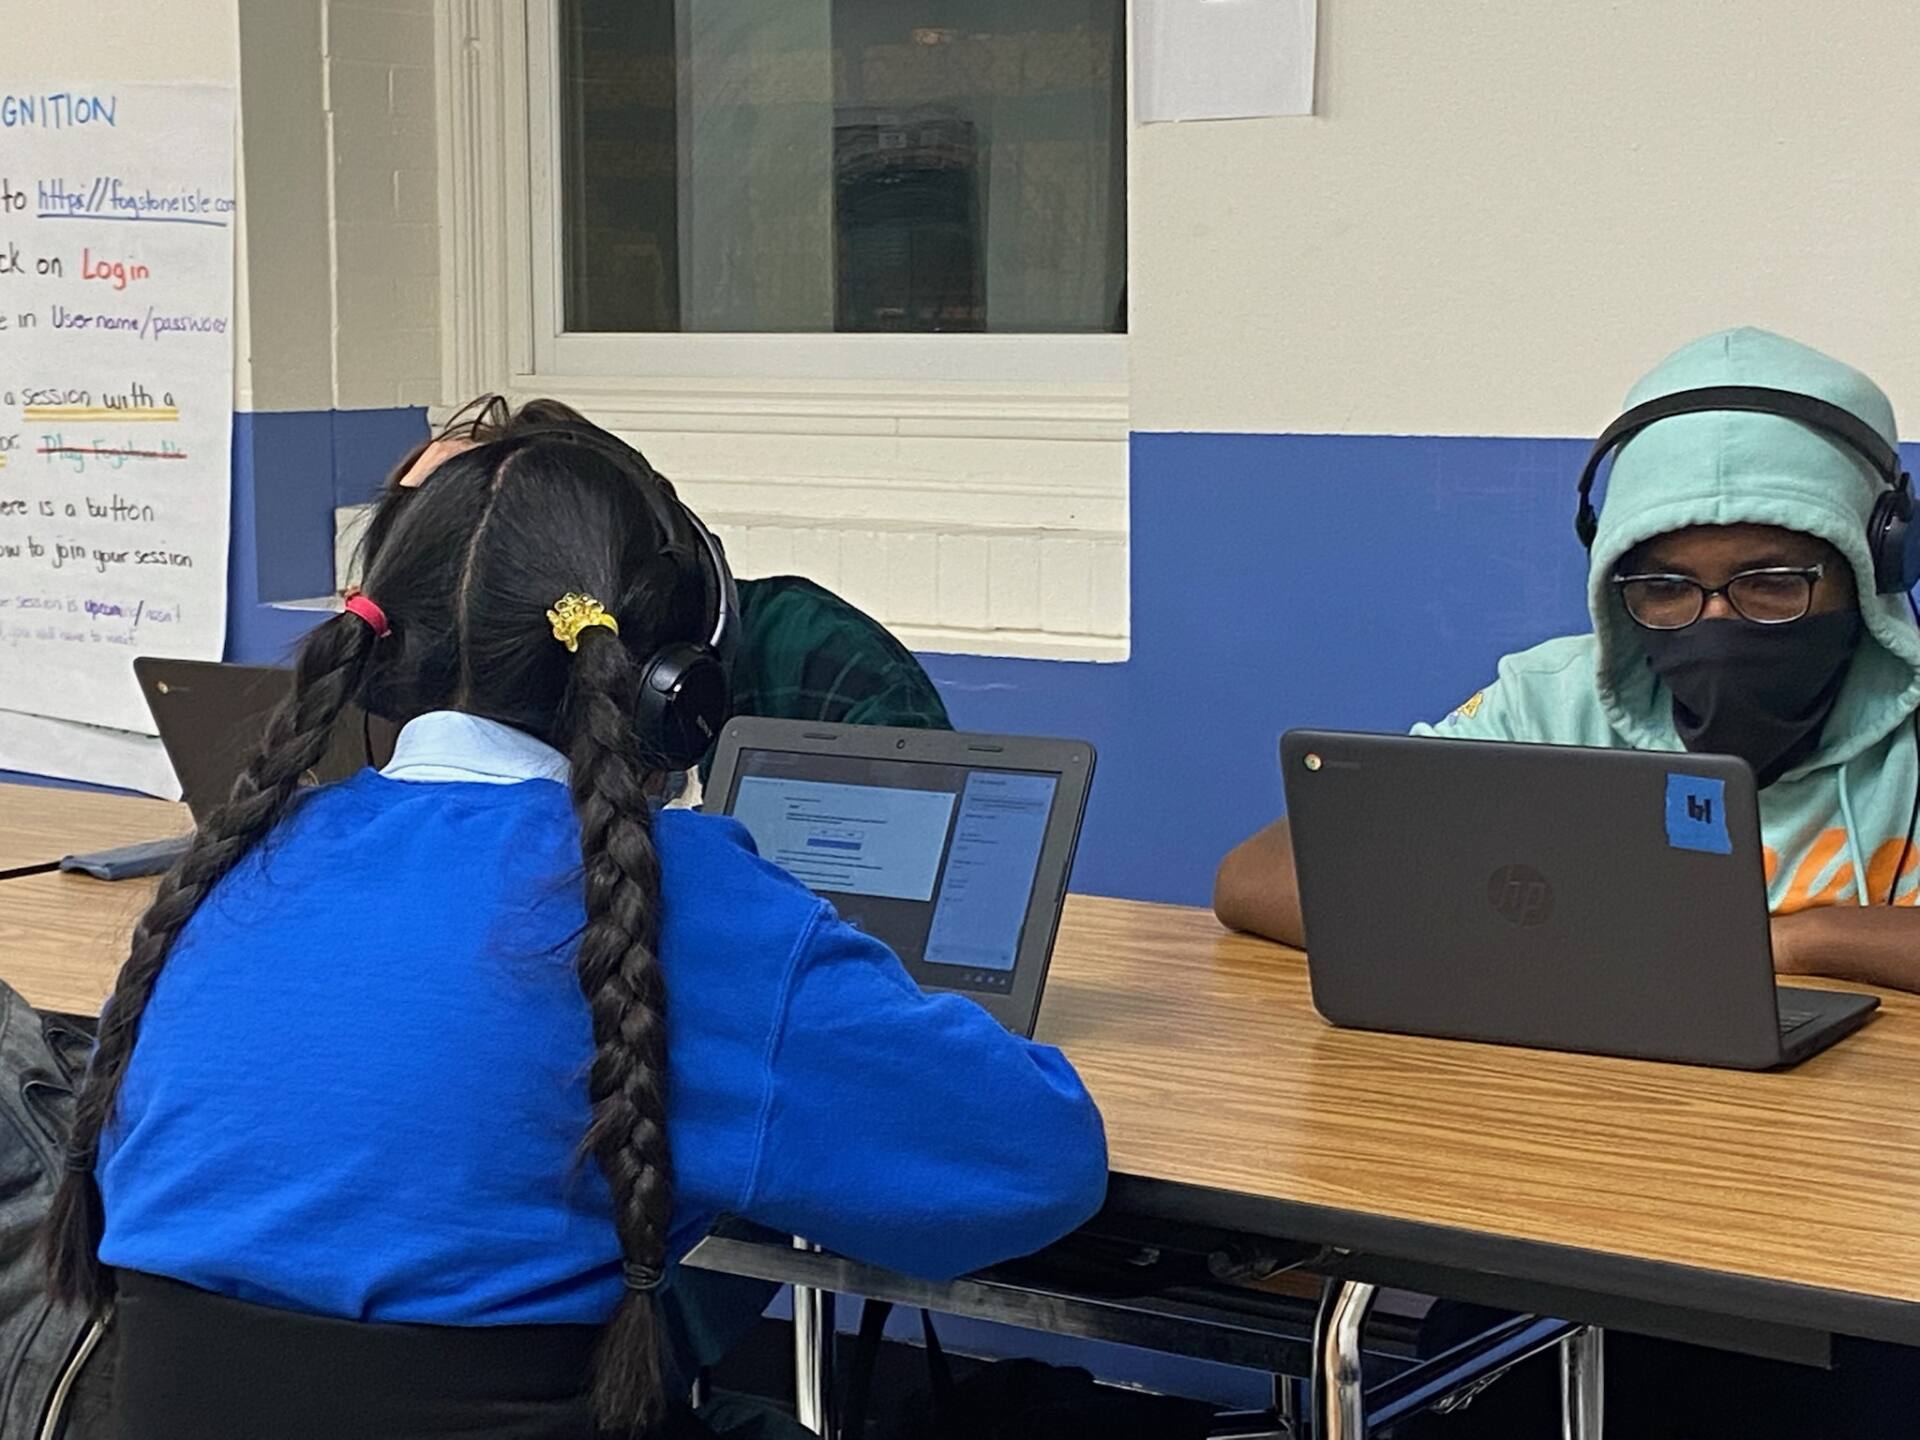 Students working on their laptops while wearing headphones